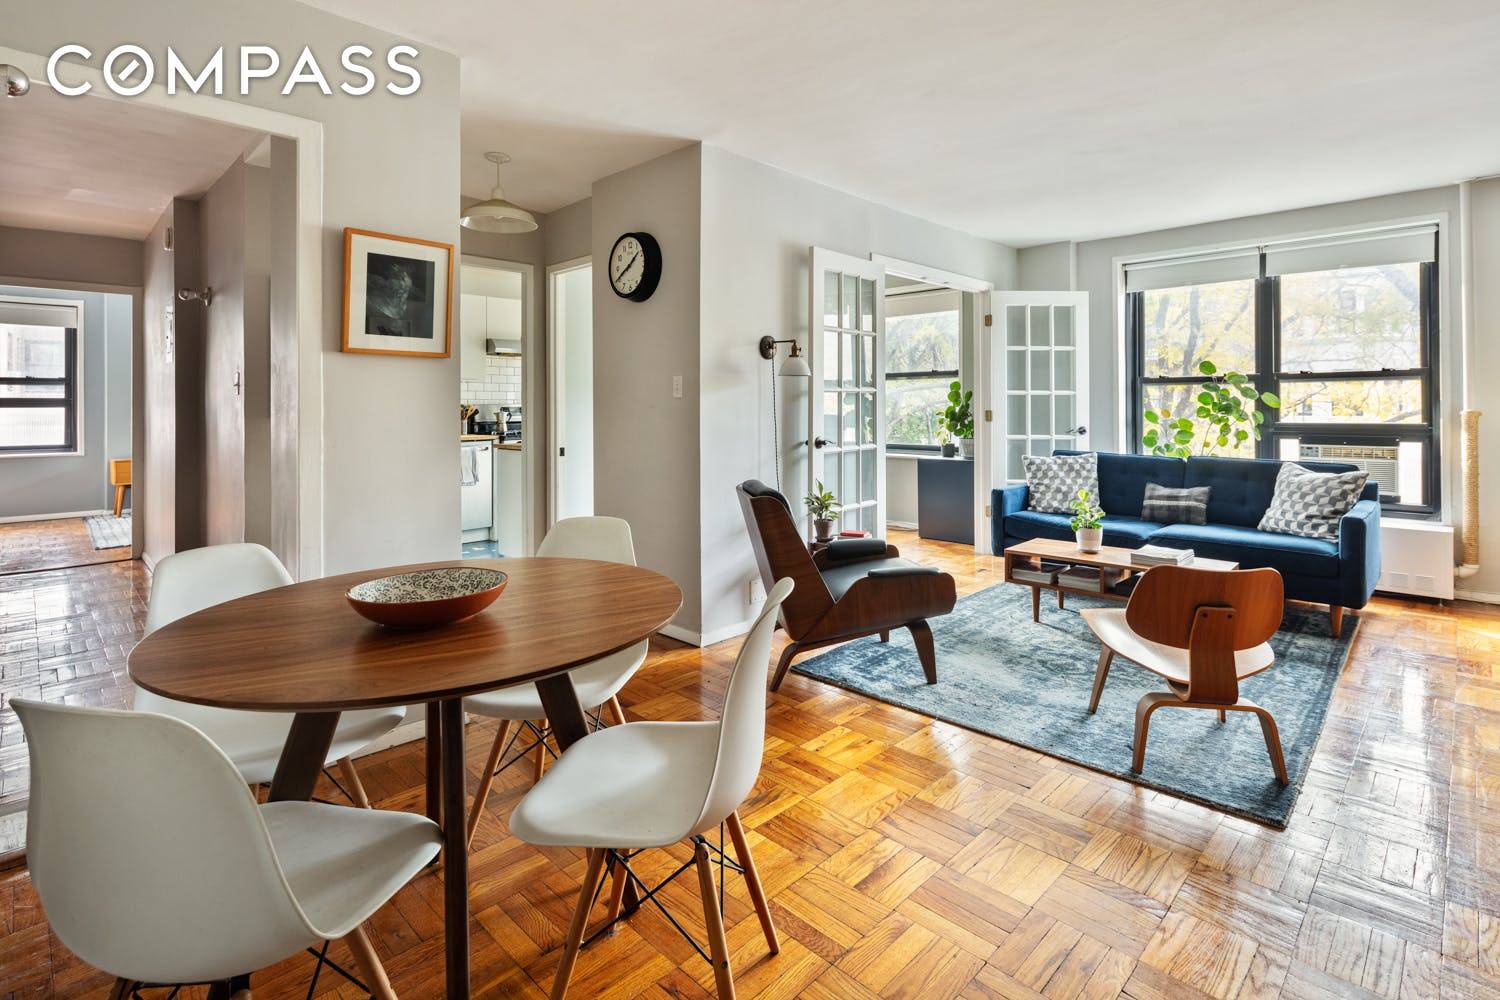 Welcome Home to a Wallace Harrison designed apartment basically, Rockefeller's personal architect who designed Rockefeller Center, the UN and Albany's Empire State Plaza.